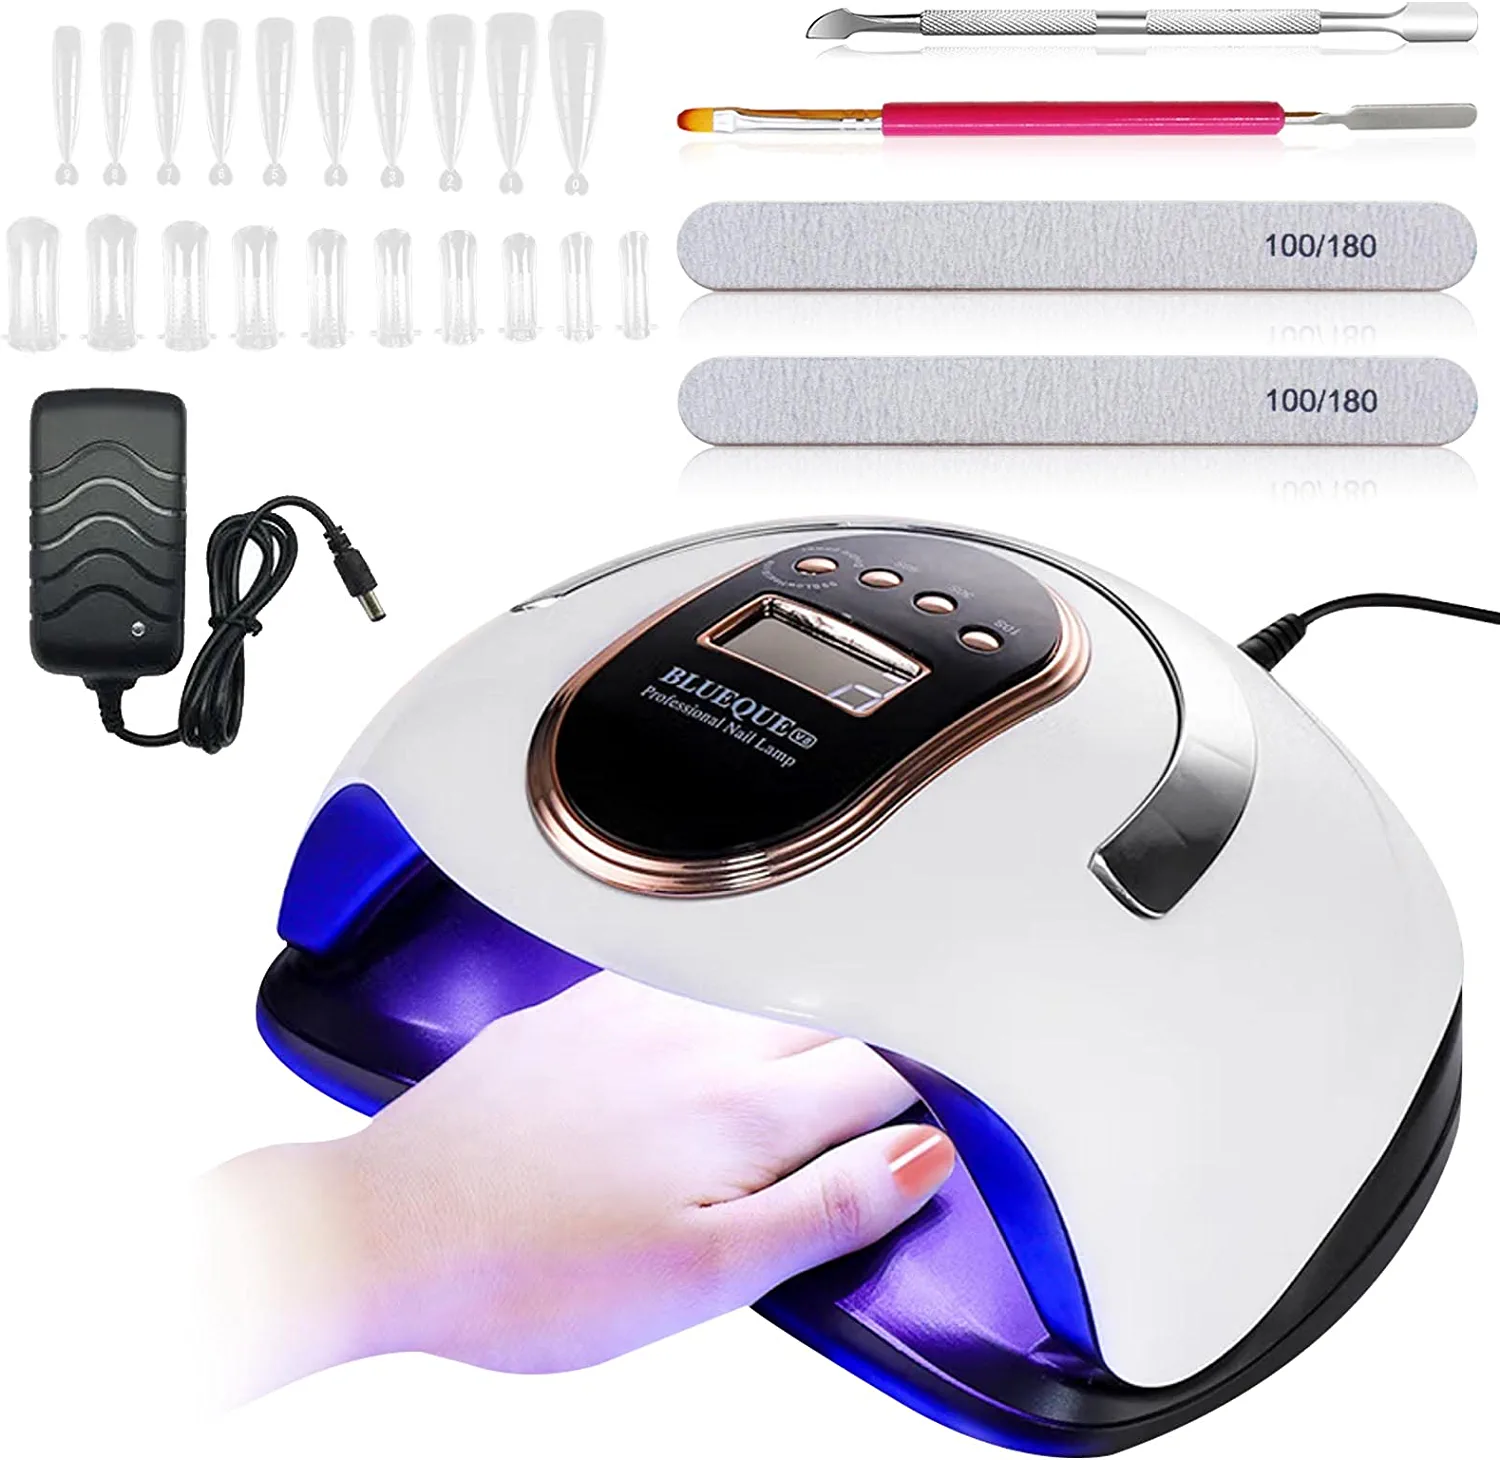 168 W LED UV Lamp for Nails, Amlope Nail Dryer for All Gel Nails, 10/30/60/99s Timer Settings, Infrared Sensor, Removable Magnetic Base Plate, LCD Display, with Nail Tips, Nail Files